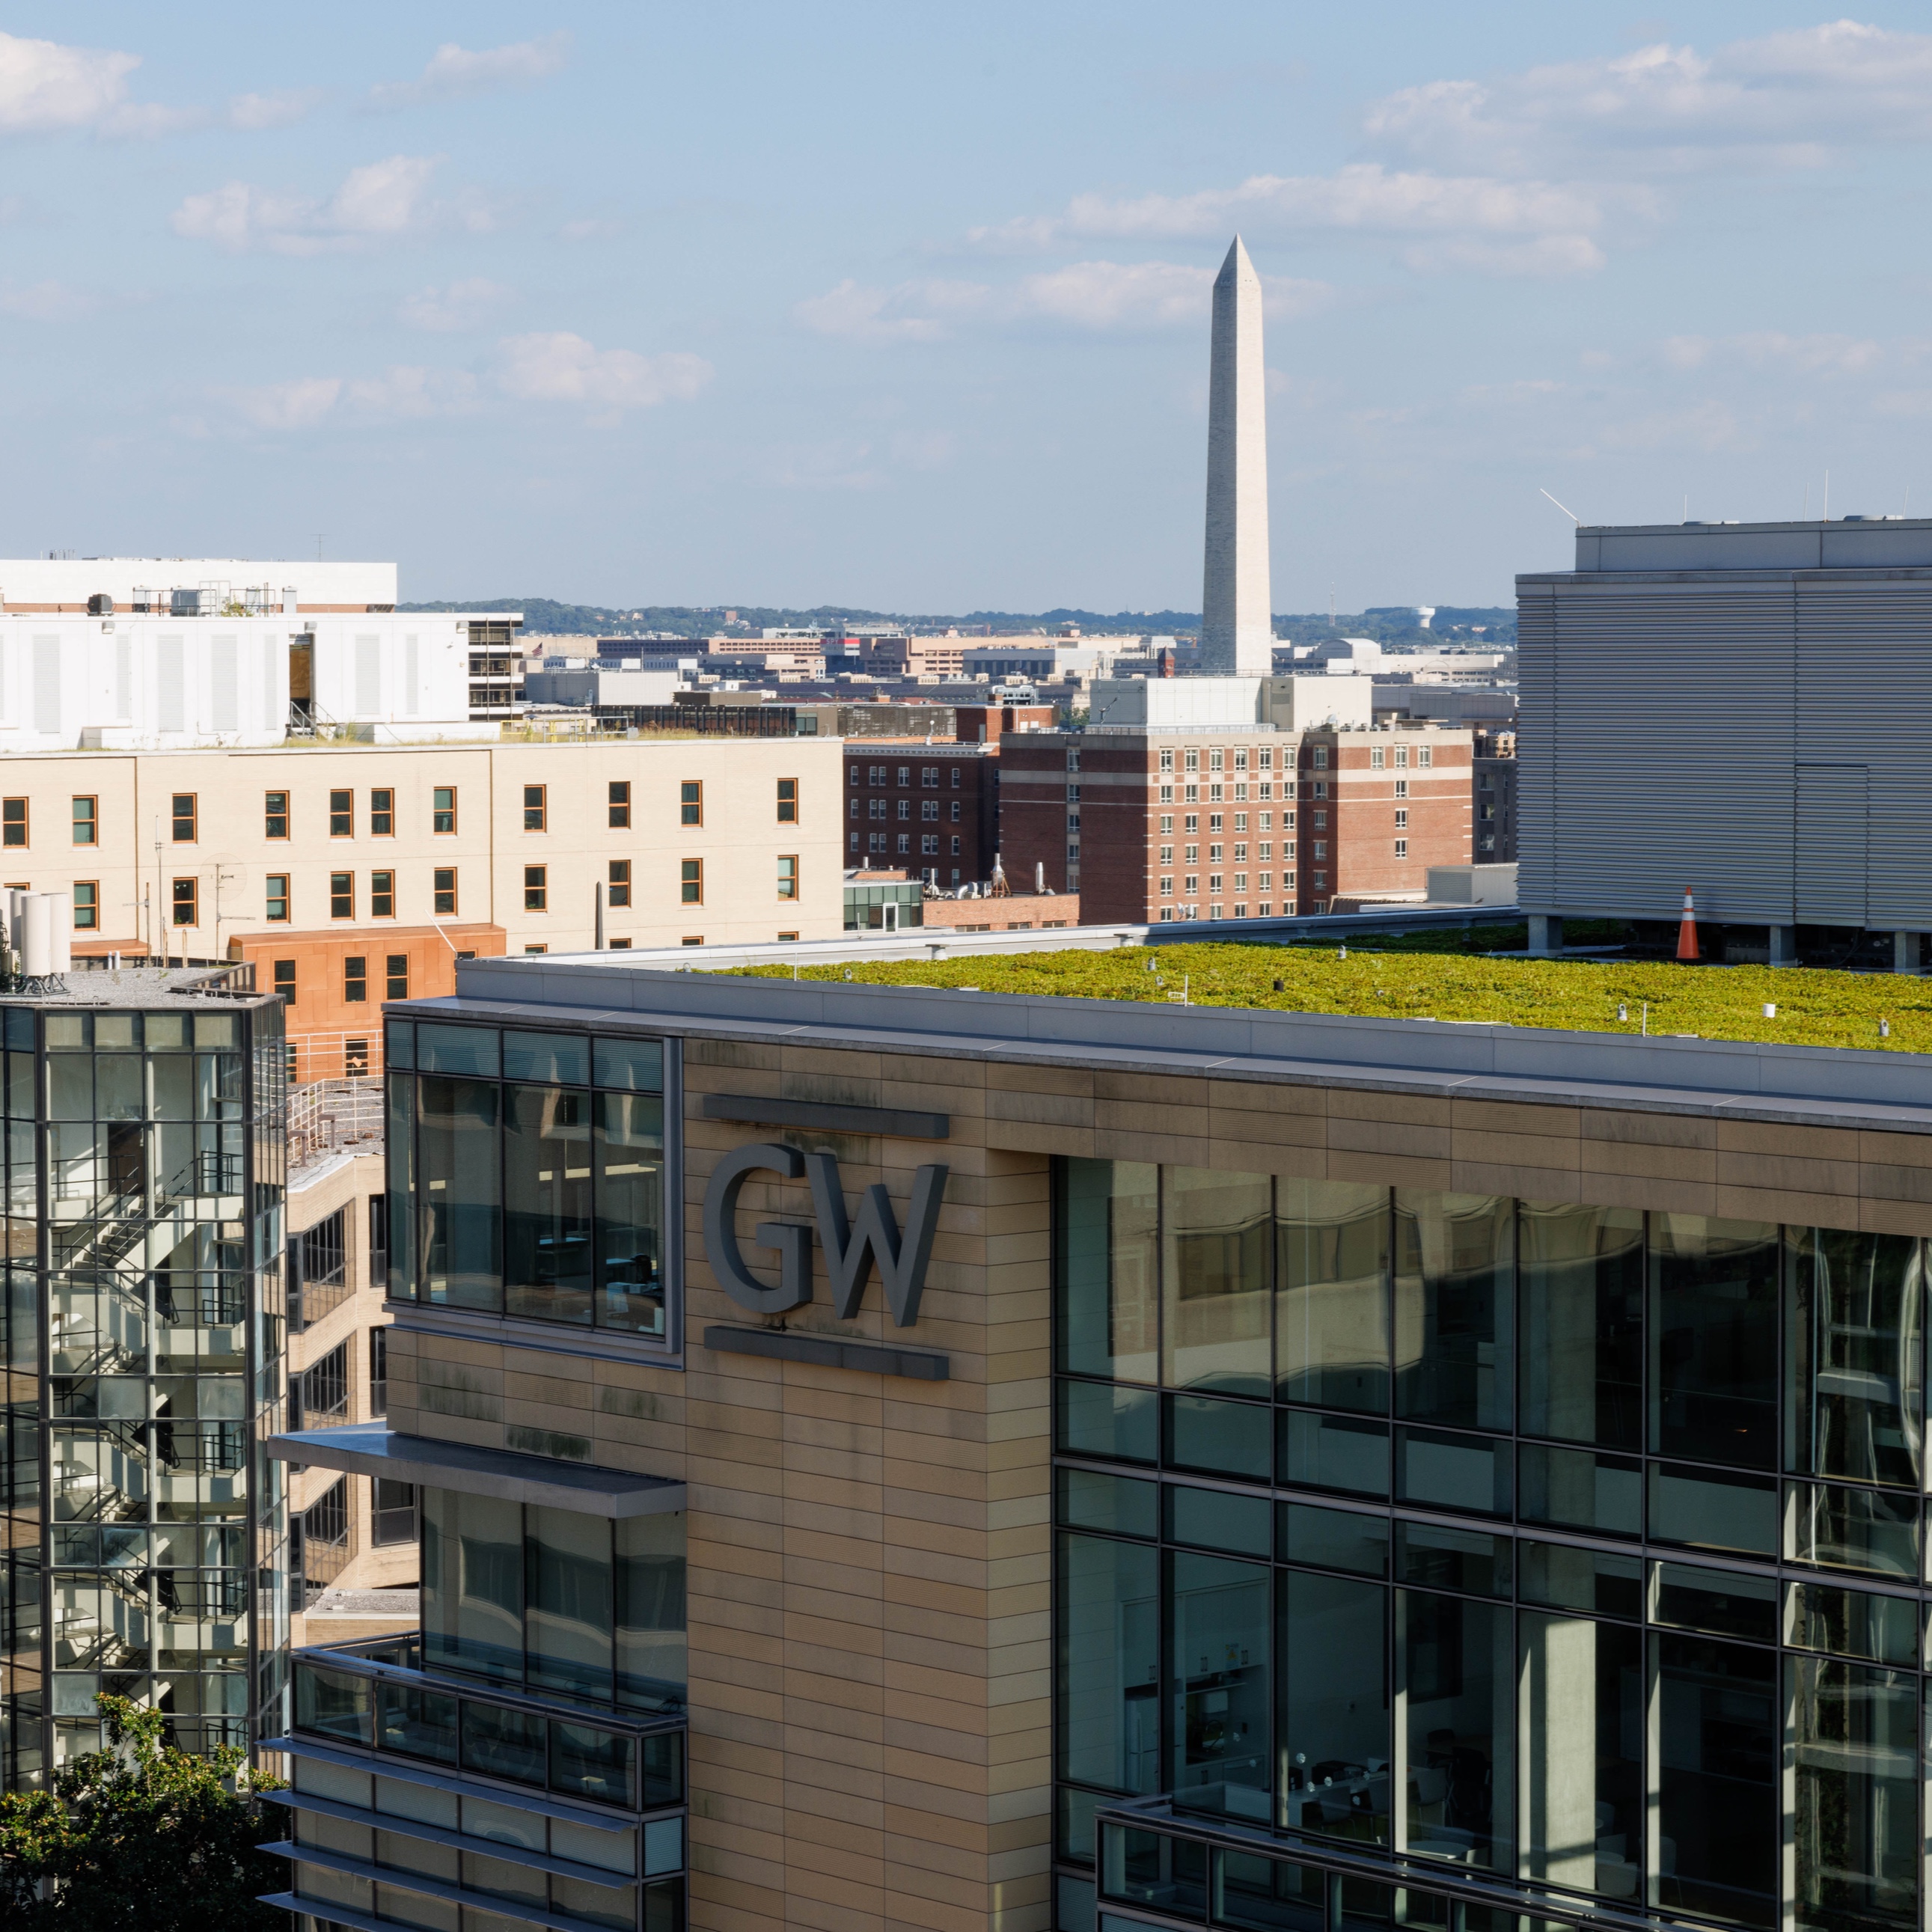 Aerial view of GW's Foggy Bottom campus